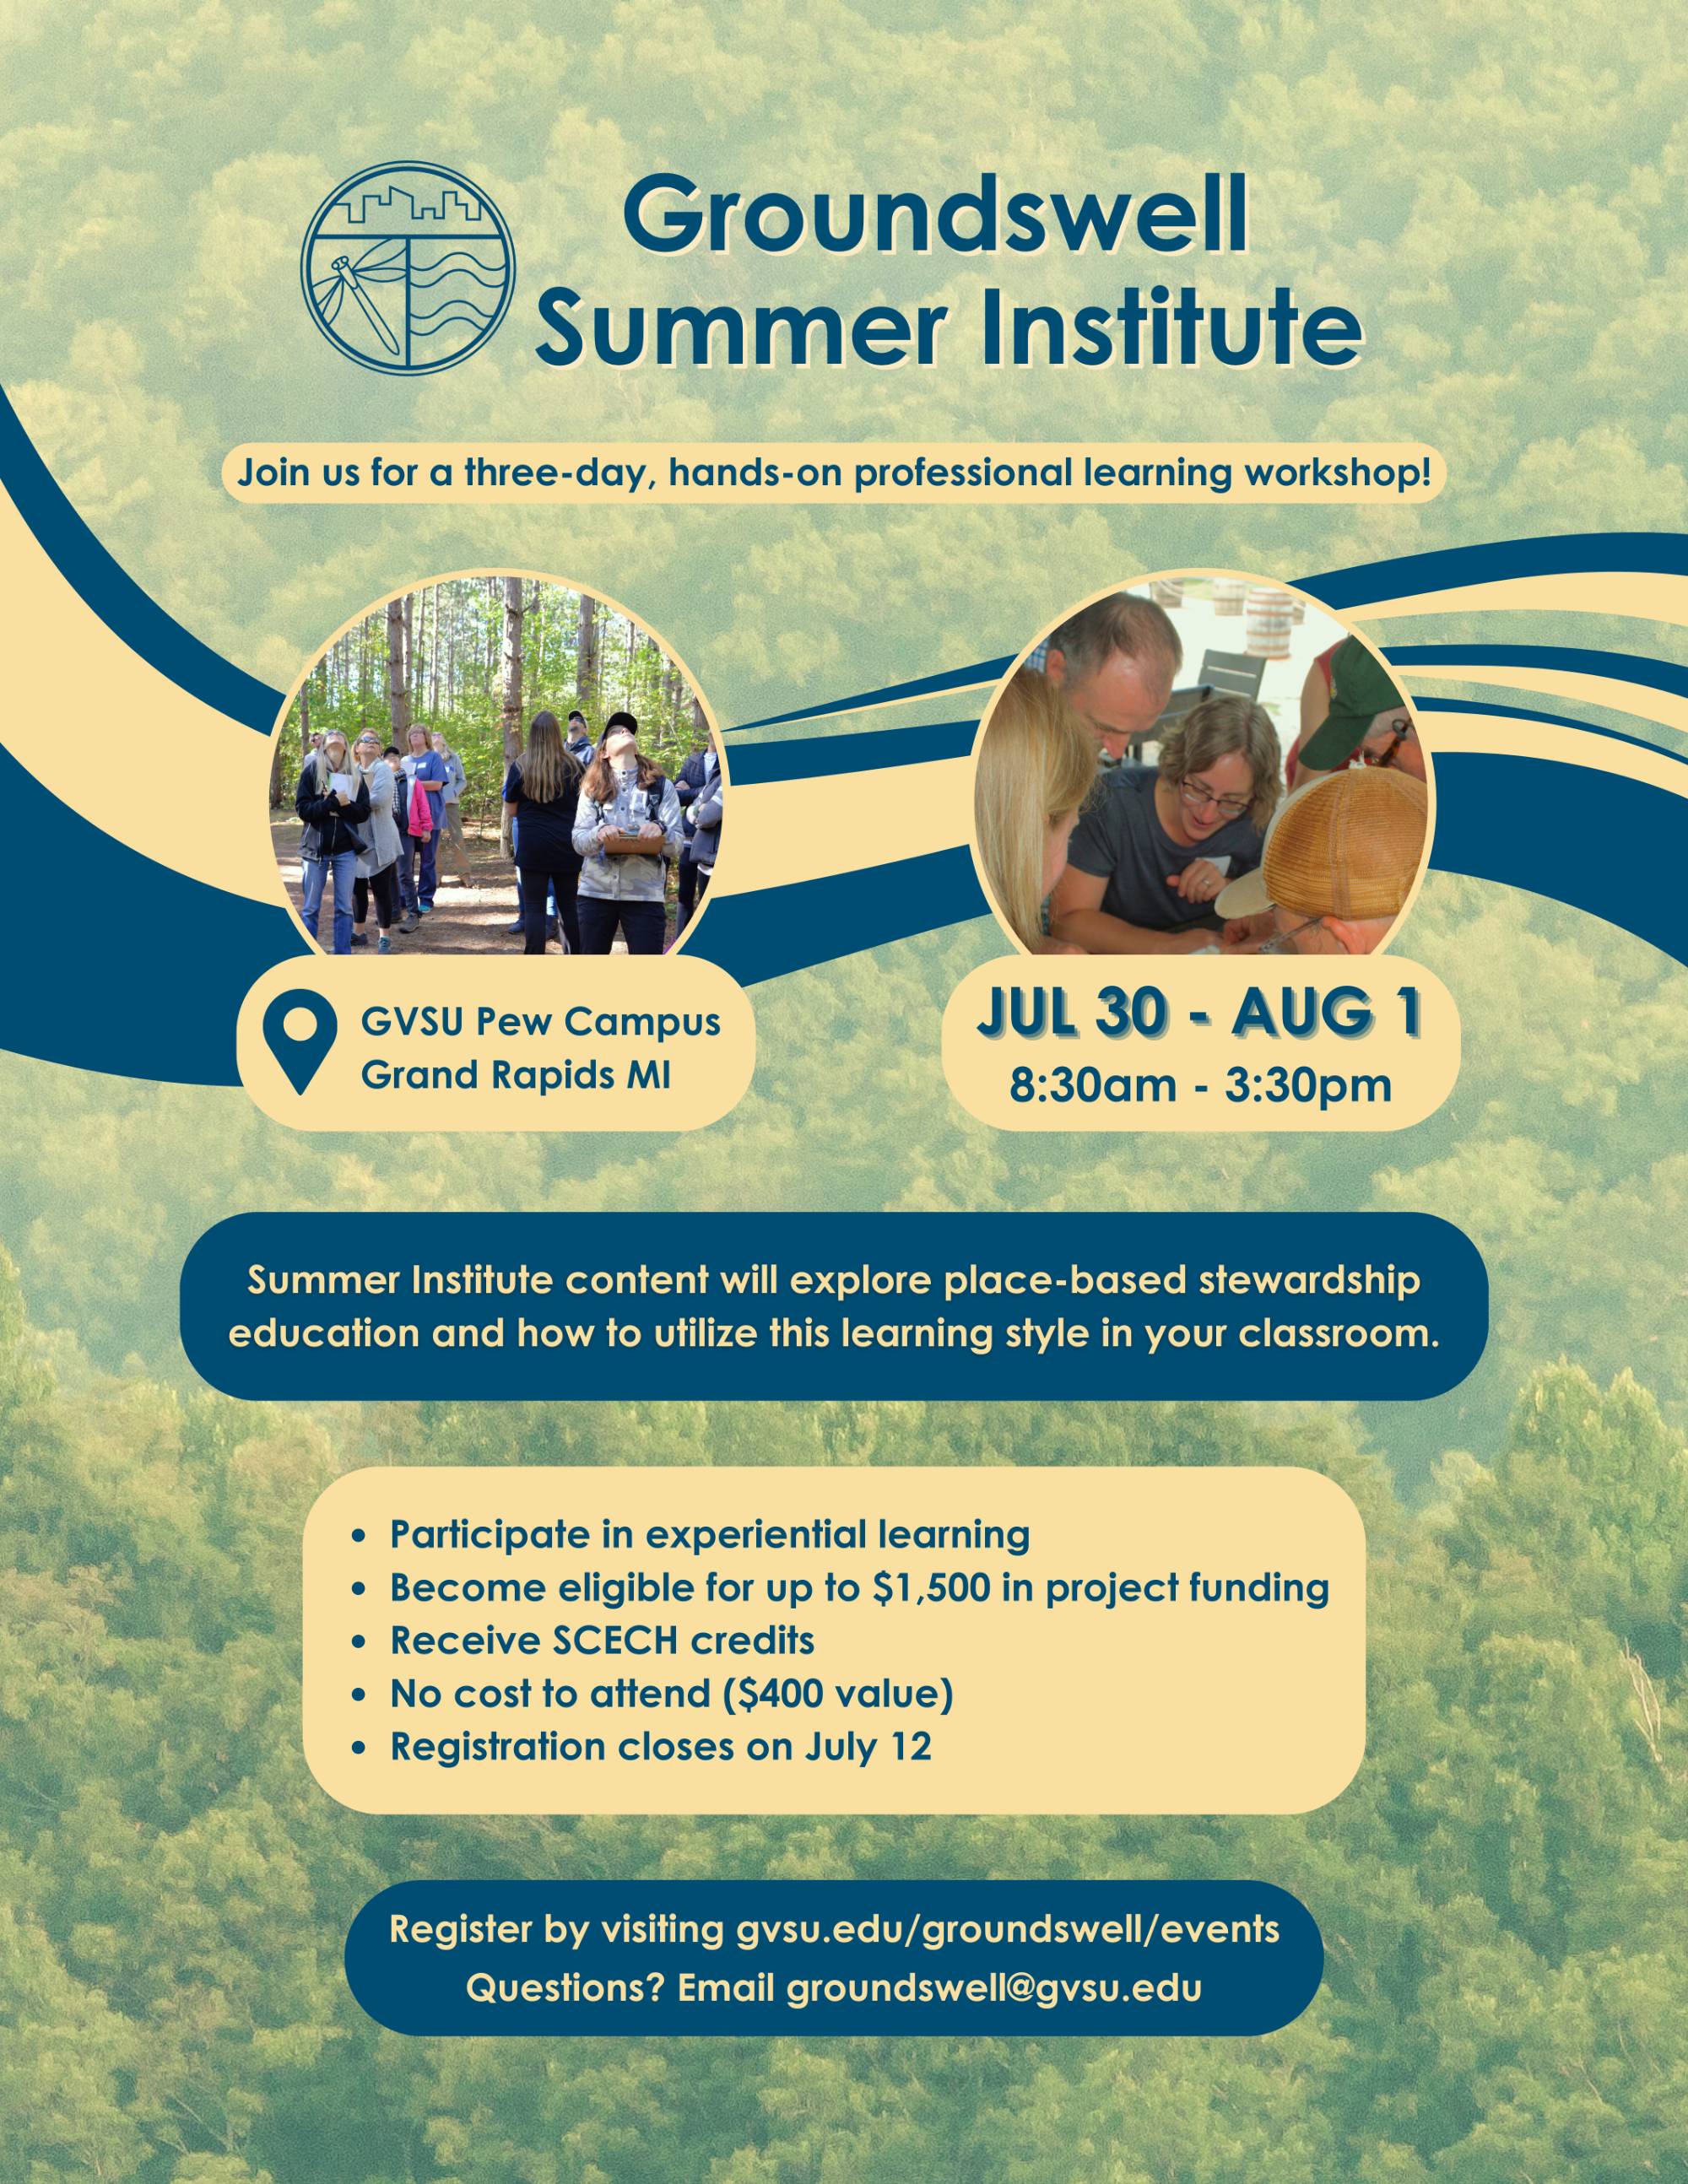 Flyer with general information for summer institute